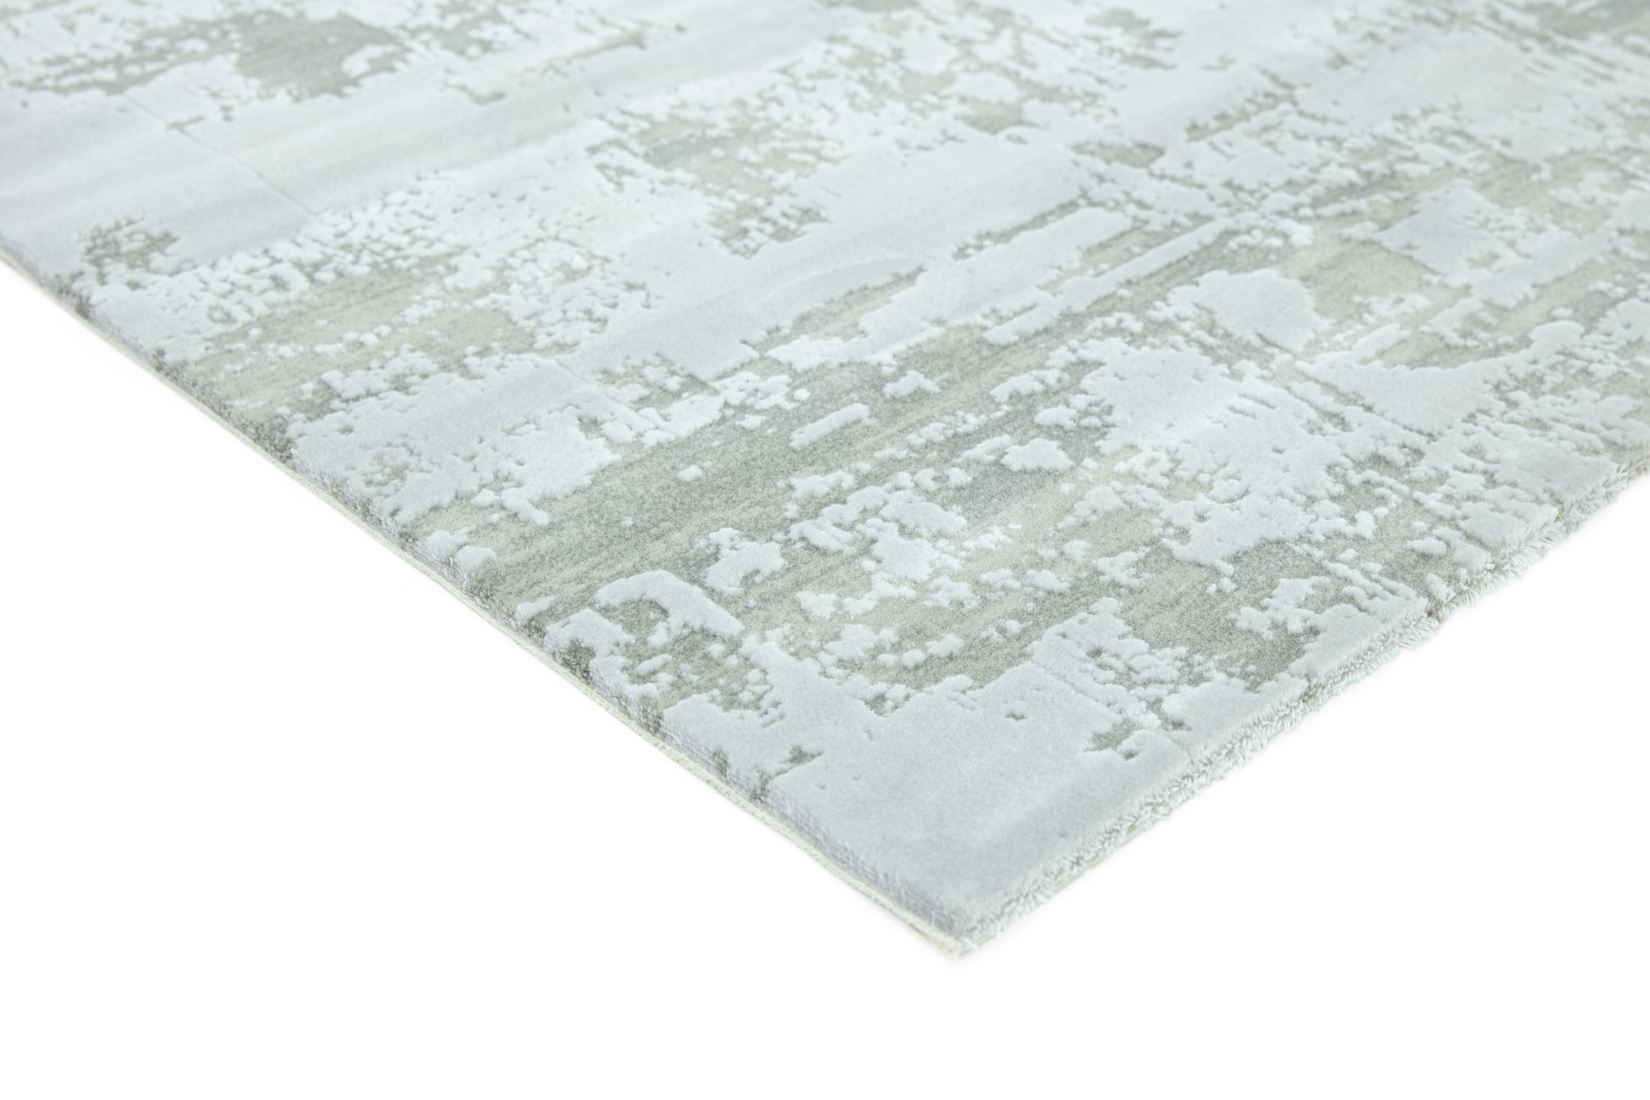 Astral Super Soft Acrylic Rug - Silver AS13